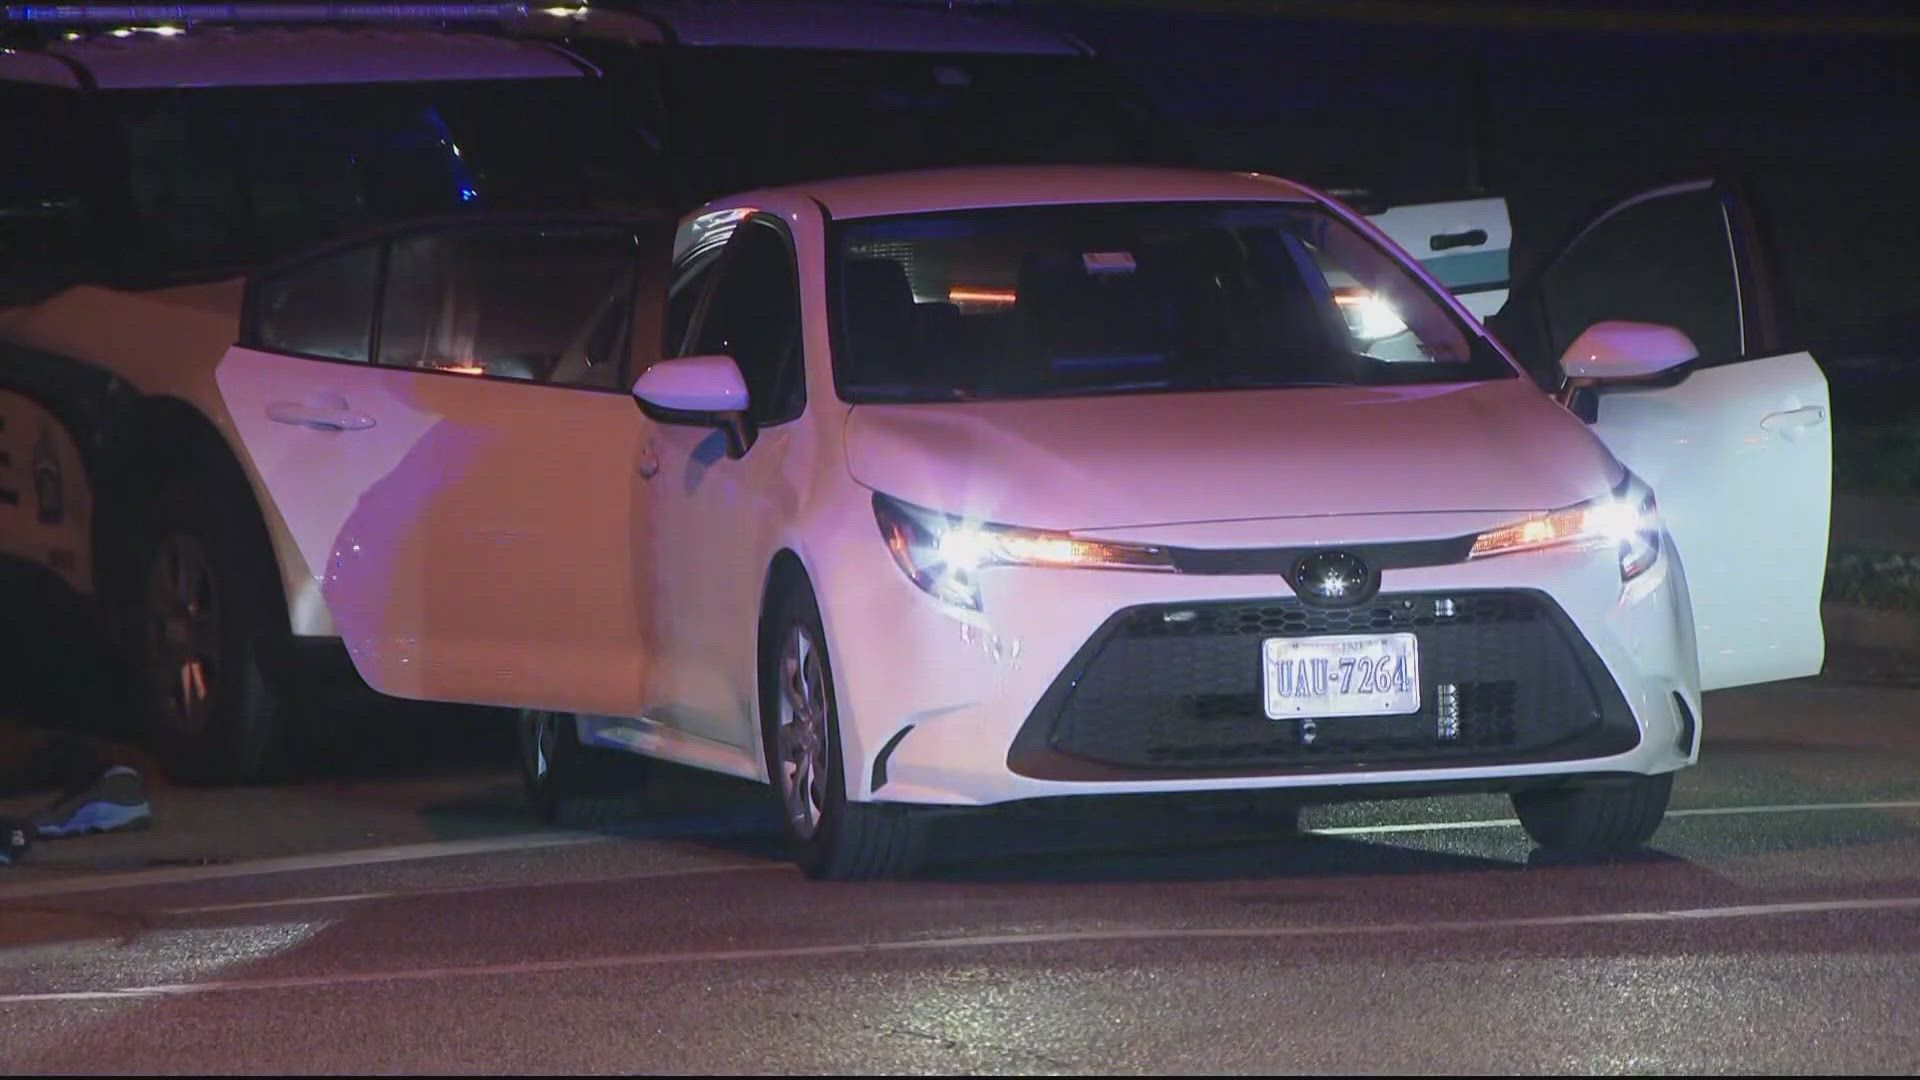 Man shoots himself in rideshare car in US state of Virginia